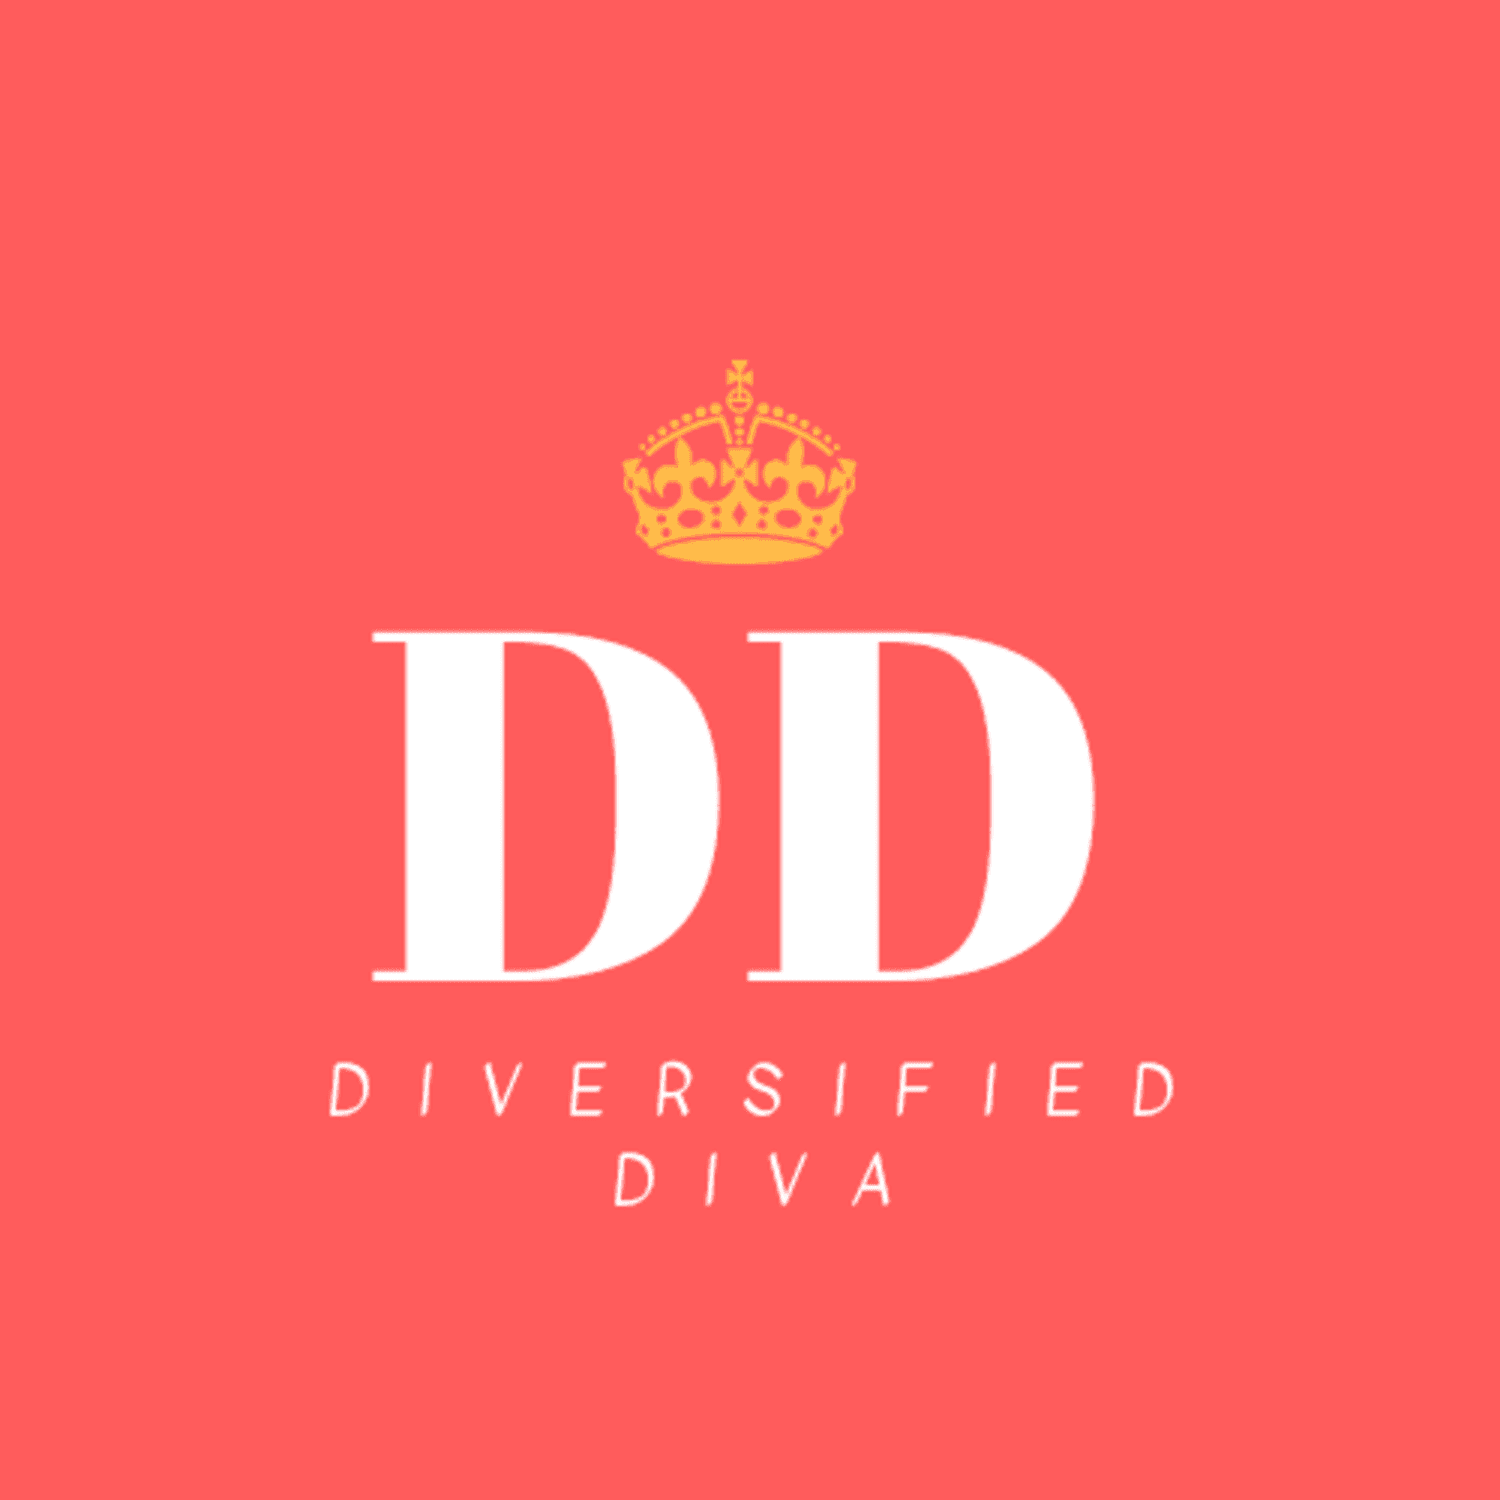 The Diversified Diva